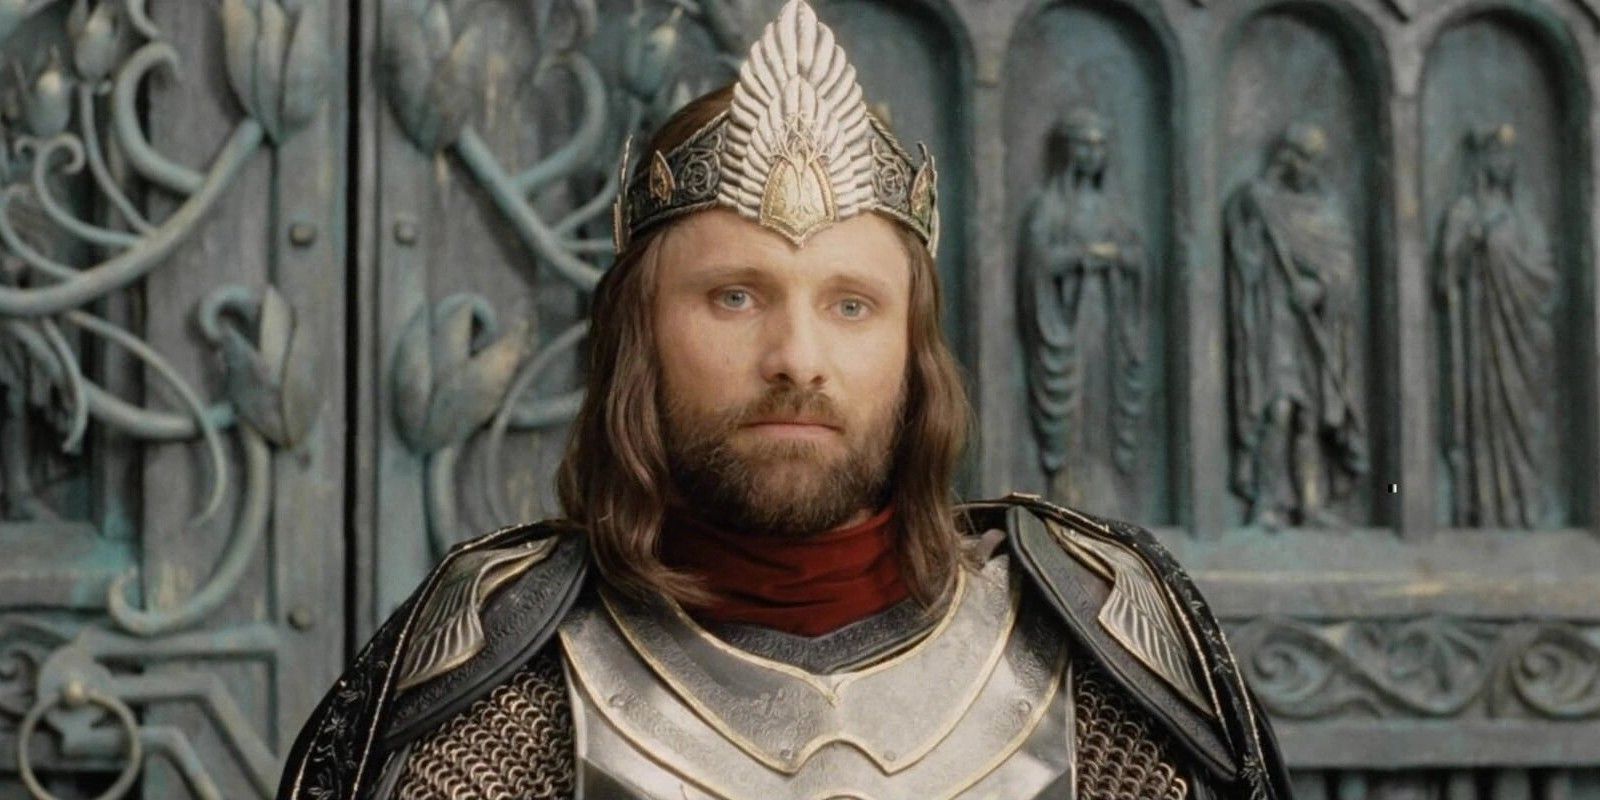 Why The Lord of the Rings Films Changed Aragorn's Motivations To Be King